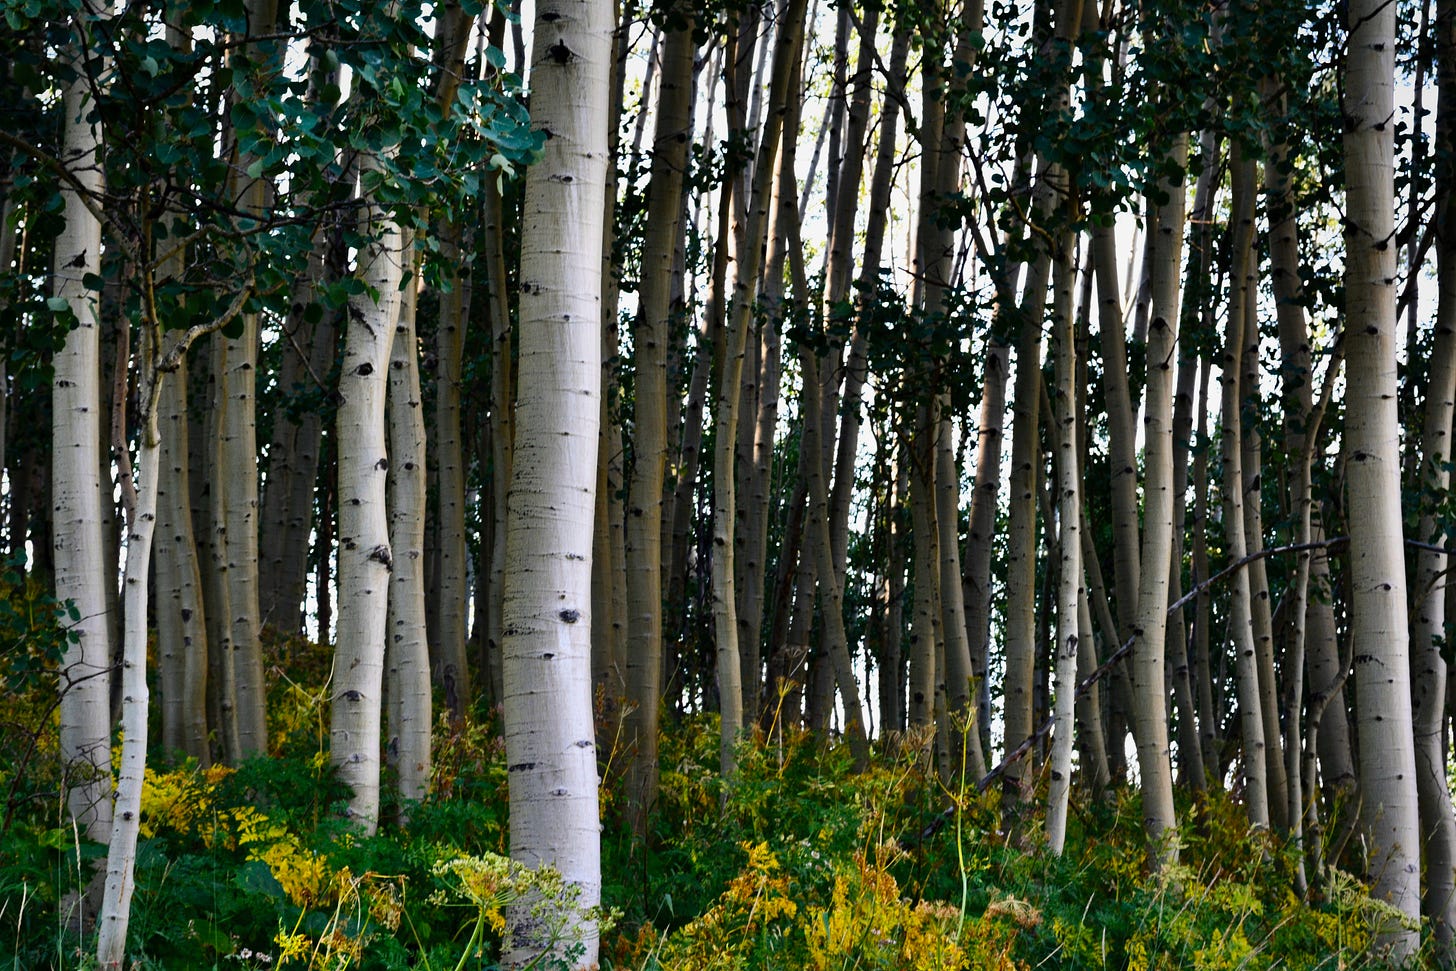 a stand of white bark aspen trees on a mountain side with green and yellow foliage in the bottom foreground